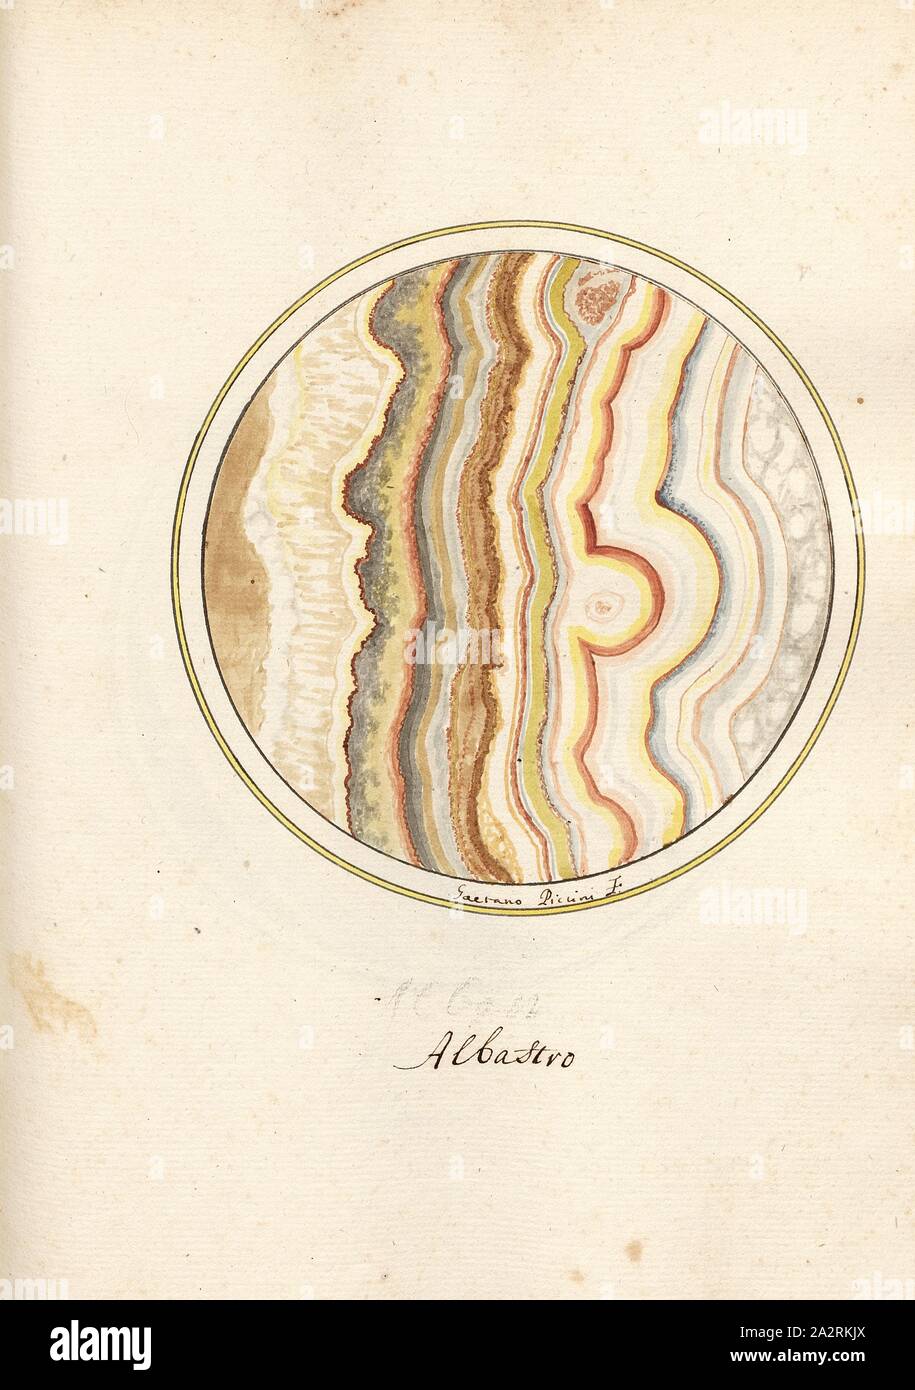 Blue 2, Cross section of a rock, signed: Gaetano Piccini F, Fig. 136, p. 279, Piccini, Gaetano (fec.), Gaetano Piccini: [Breccia antica]. [Rom]: [s.n.], [17 Stock Photo